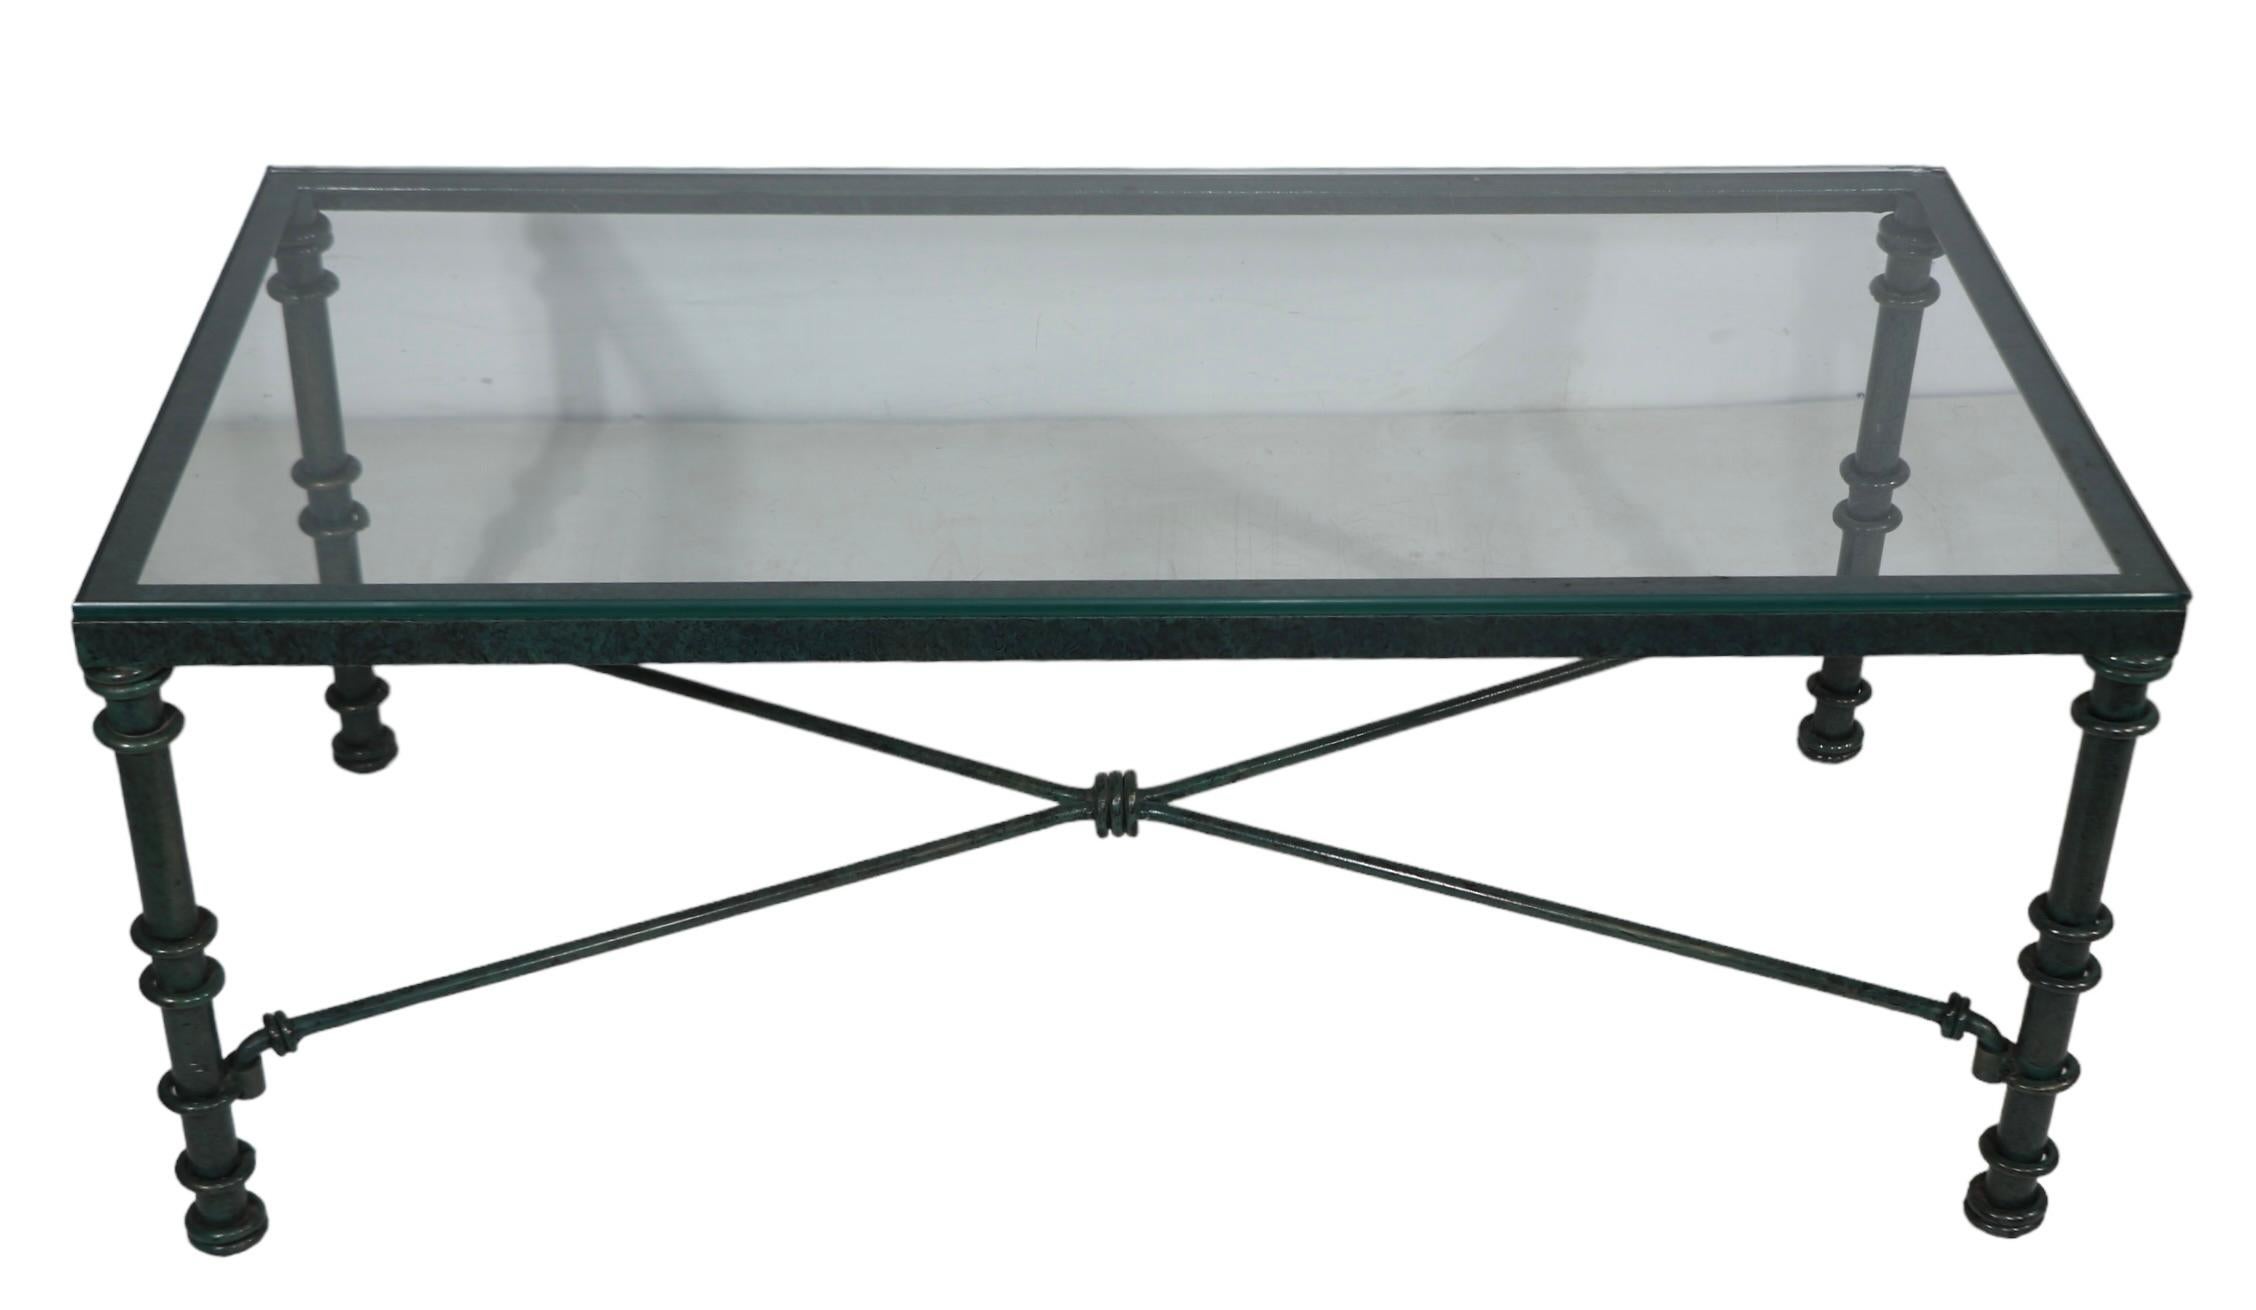 Brutalist Faux Verdigris Finish Glass Top Coffee Table c. 1970/1980's For Sale 4